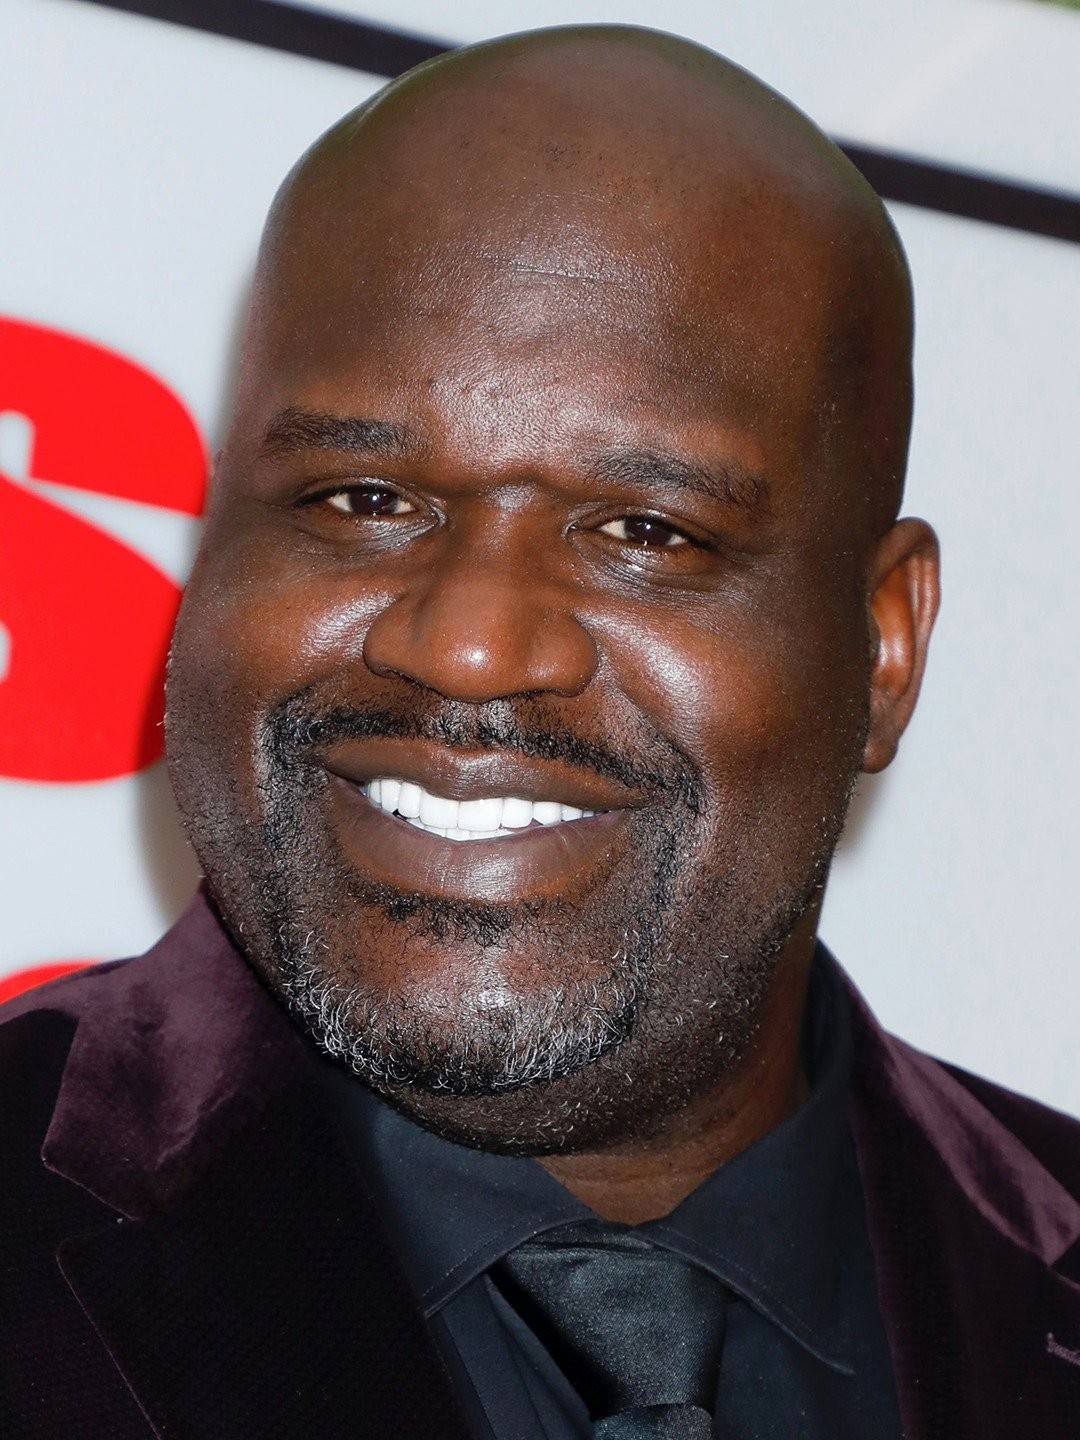 WATCH: 4-Time NBA Champion Shaquille O'Neal Forgot About His Free